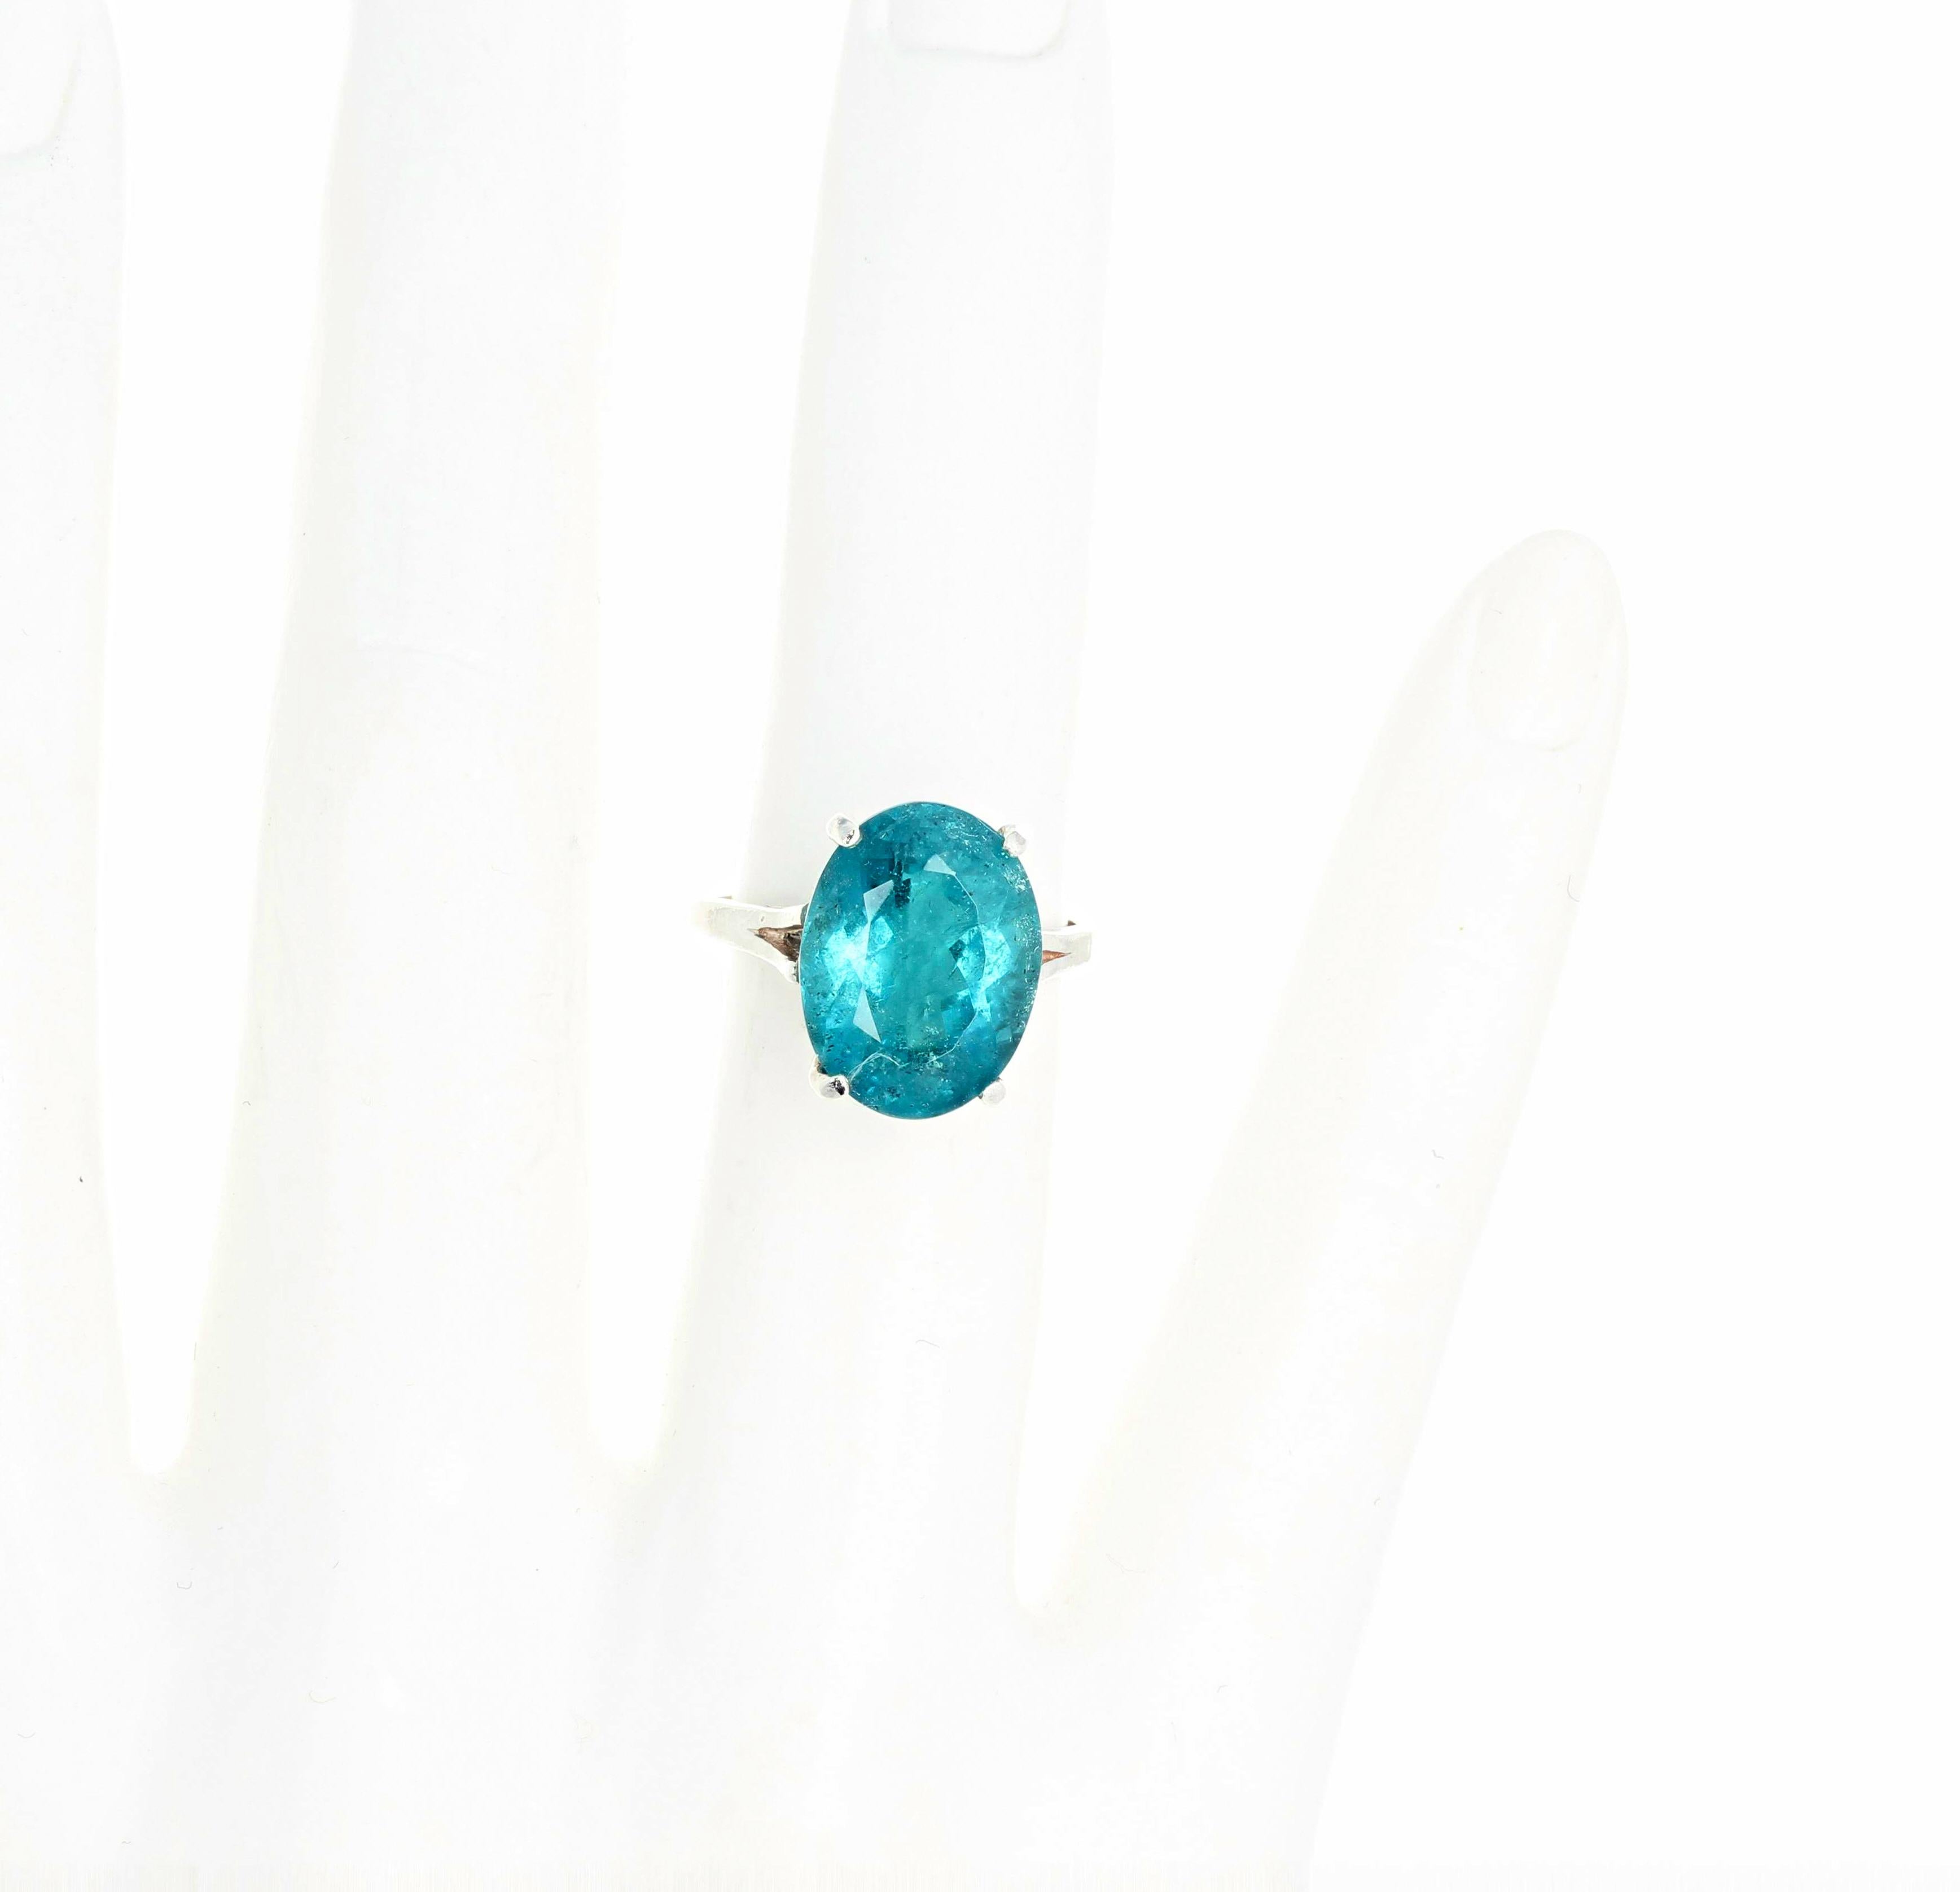 Gemjunky Rare 7.9 Cts Blue Indicolite Tourmaline Sterling Silver Cocktail Ring 4